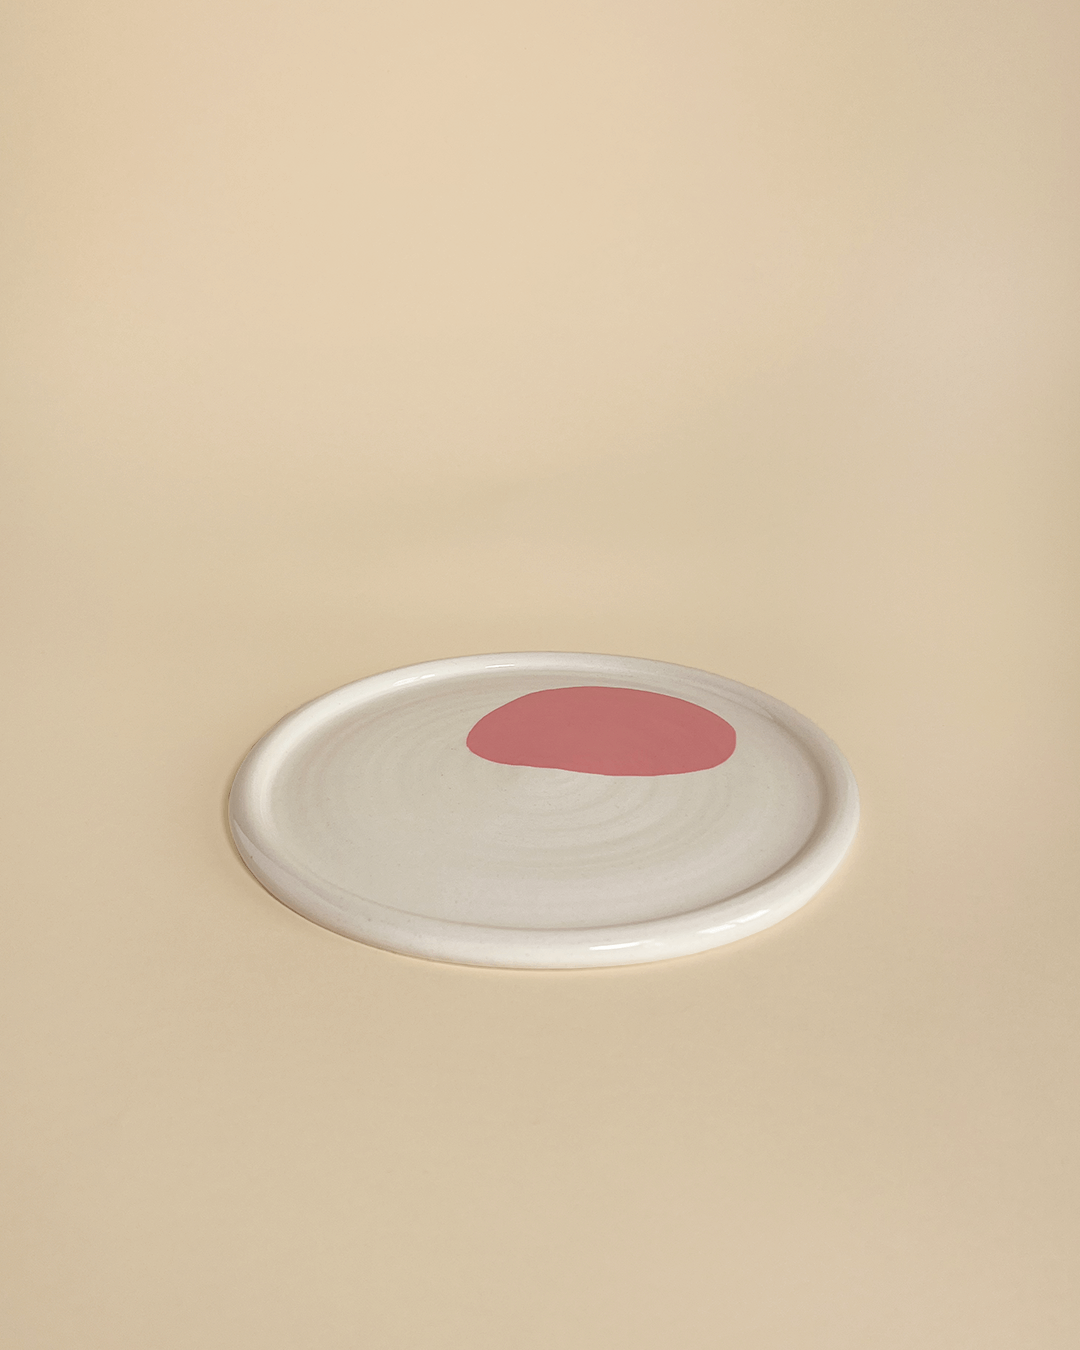 The dotted ceramic plate by Laura Liza is ideal for breakfast, apéro or snack-time whenever you crave it. The color highlights give the plates a unique touch. The dotted ceramic plate fits perfectly with the chunky ceramic mug and highlights a fine breakfast table.